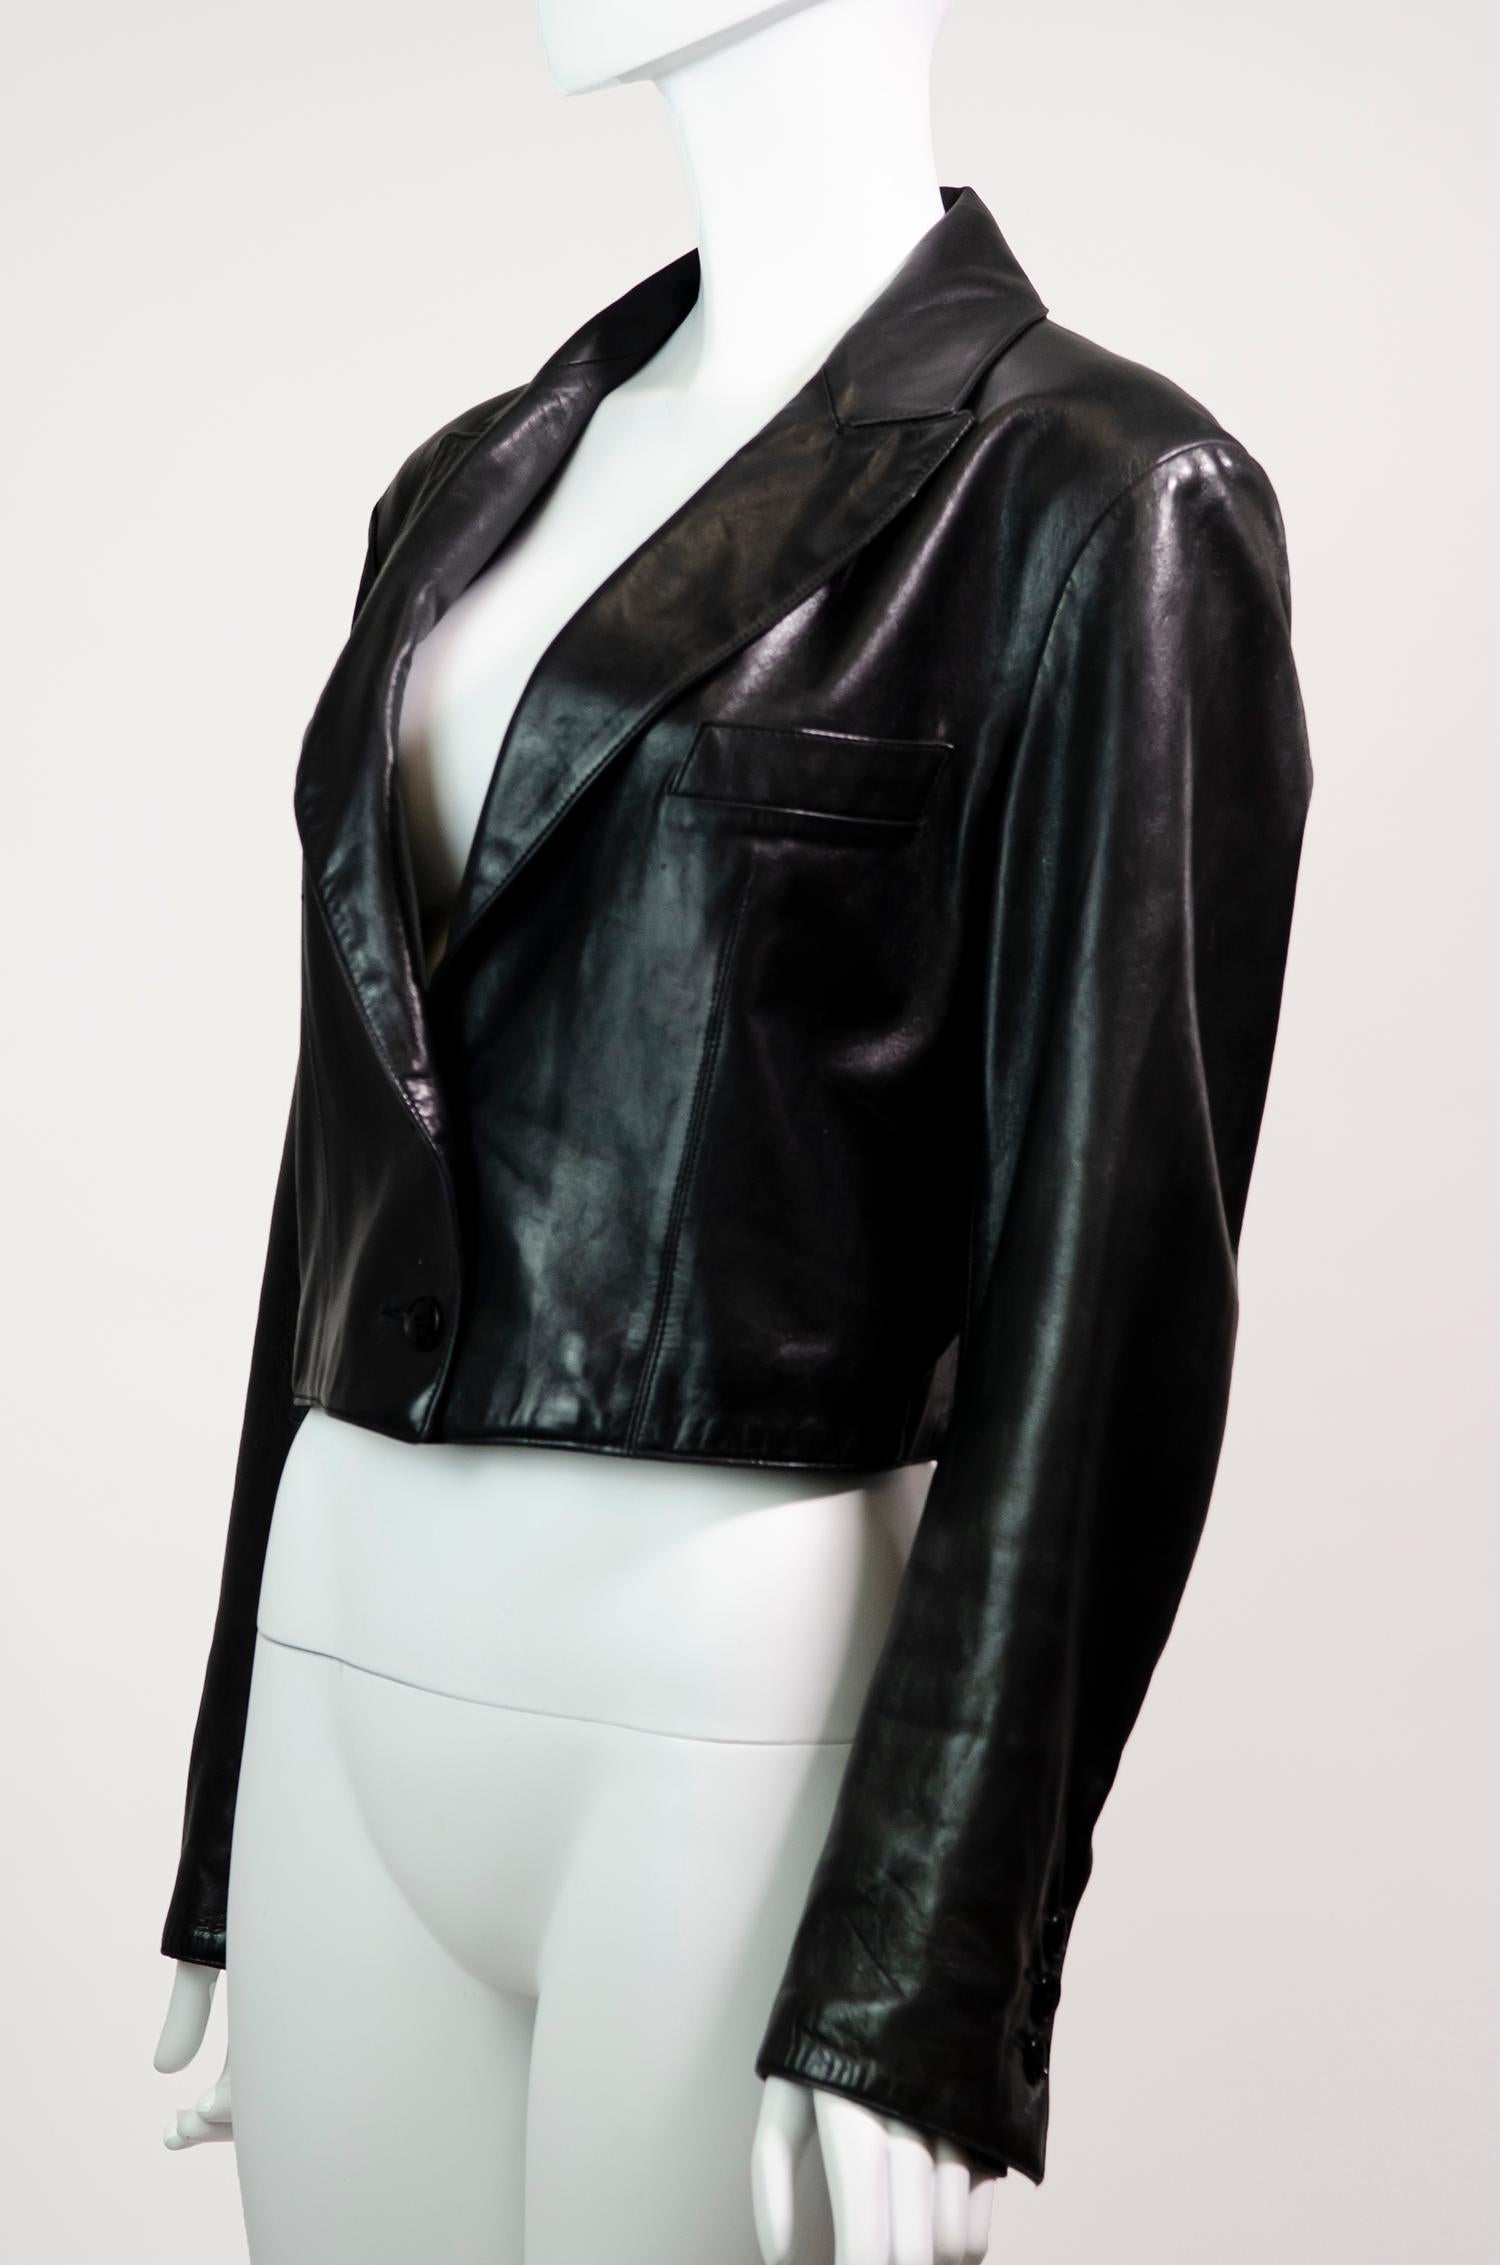 The perfect cropped leather jacket by Azzedine Alaïa from the 1990s.

This classic Alaïa blazer is a true wardrobe staple that will never go out of style. The quality is outstanding - made from buttery lamb leather and lined in silk. This soft